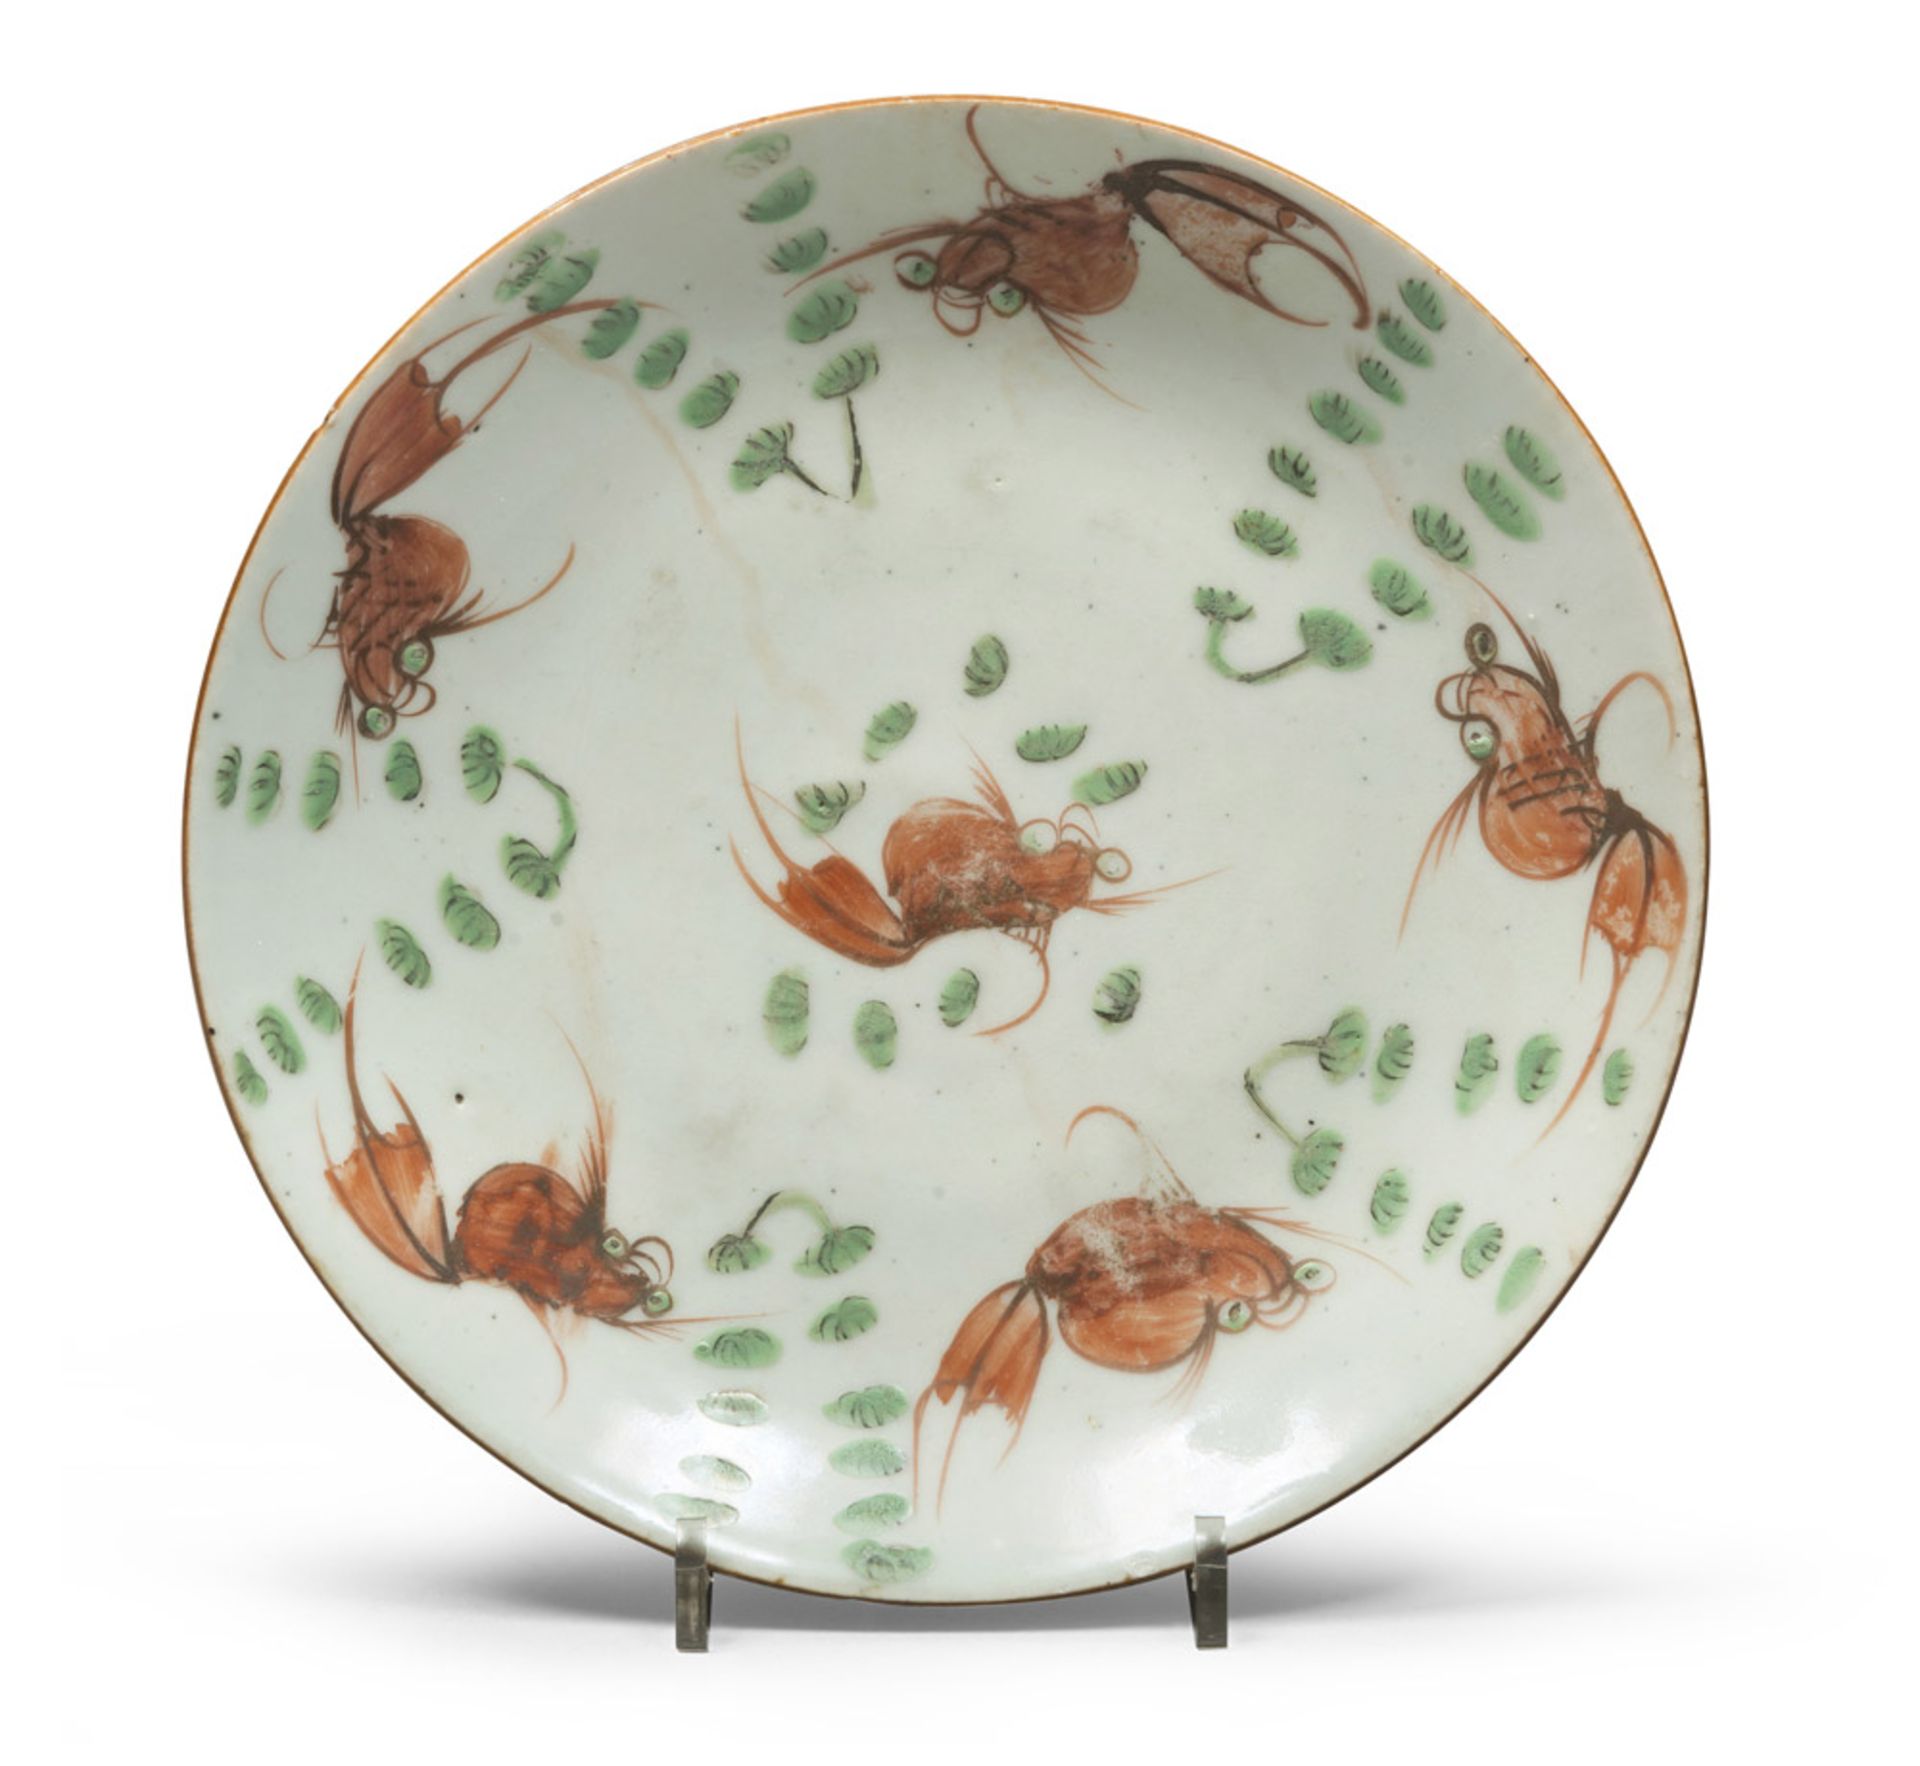 A CHINESE PORCELAIN DISH. EARLY 20TH CENTURY.